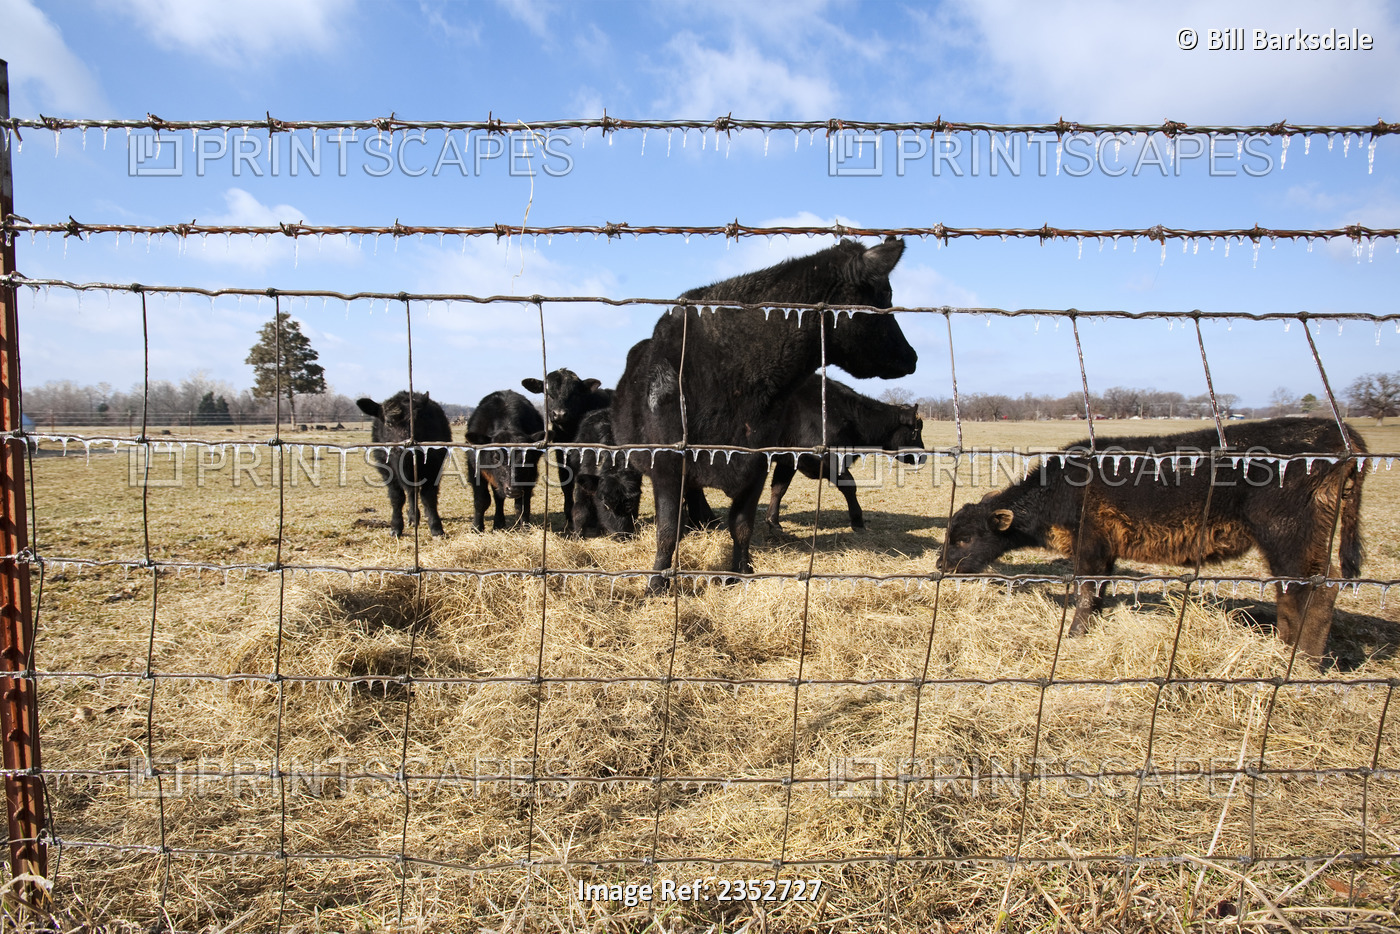 Livestock - Black Angus beef cattle feed on hay on a dry, cold winter pasture ...